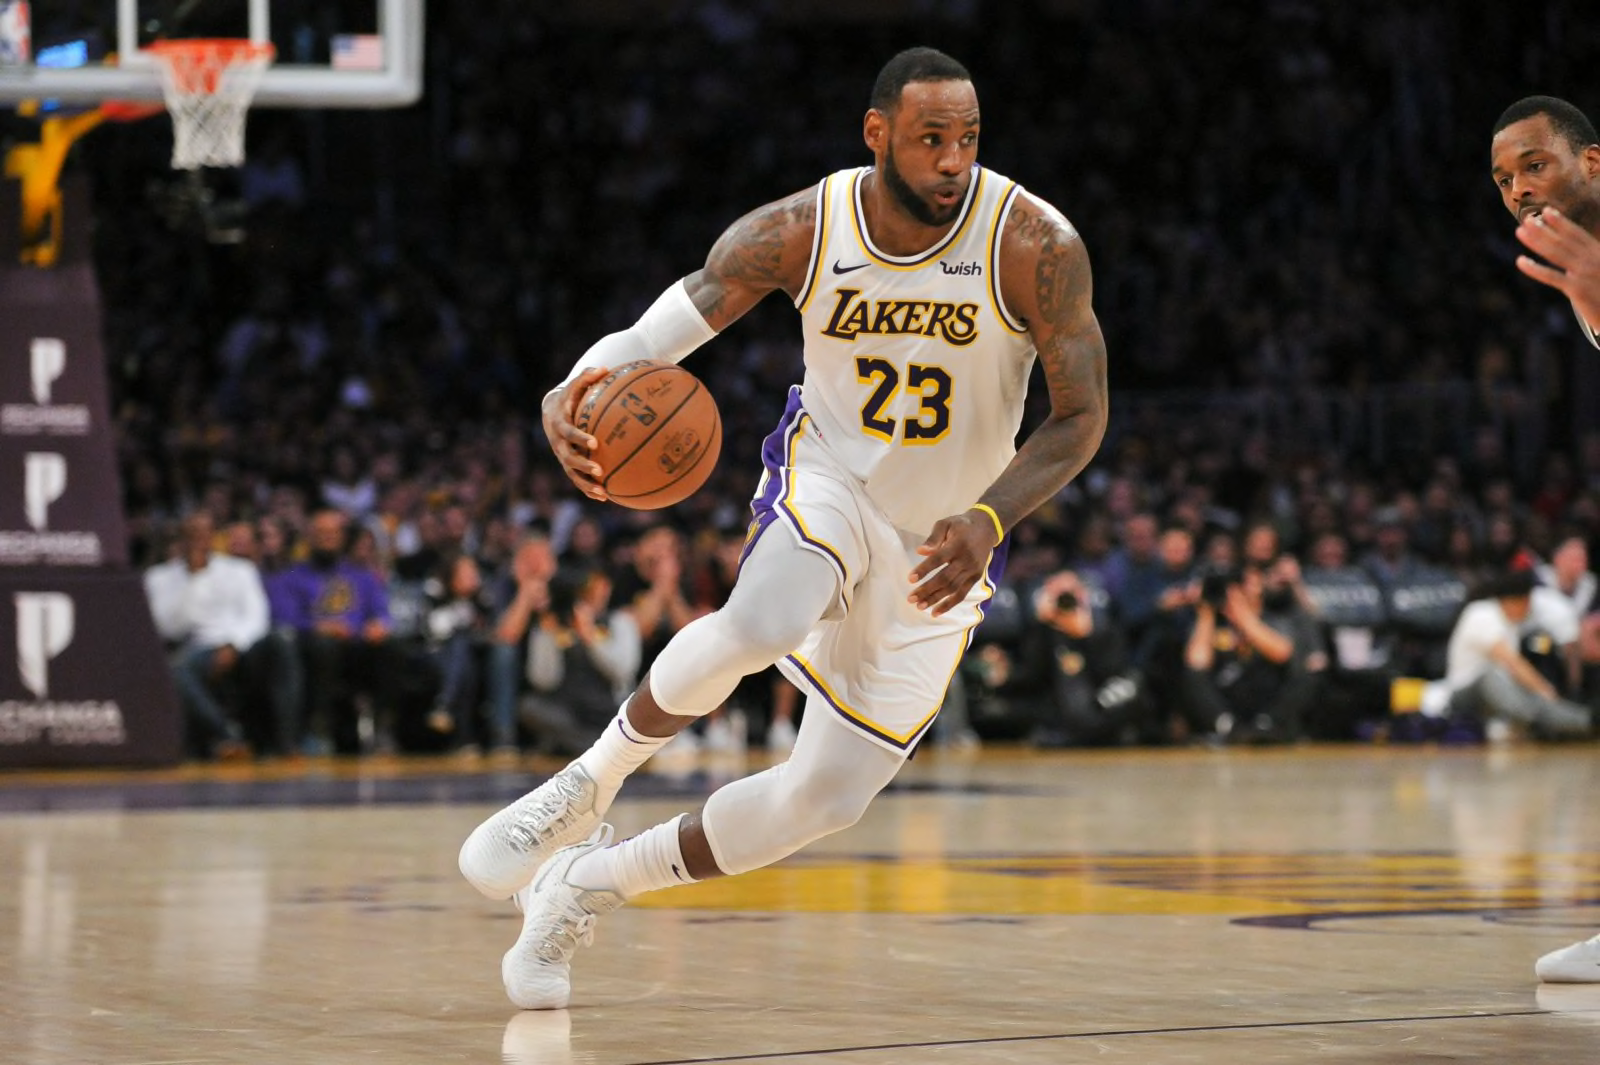 Passing who many still consider to be the best to ever do it, Lebron hit a huge milestone in his first year with the Lakers.